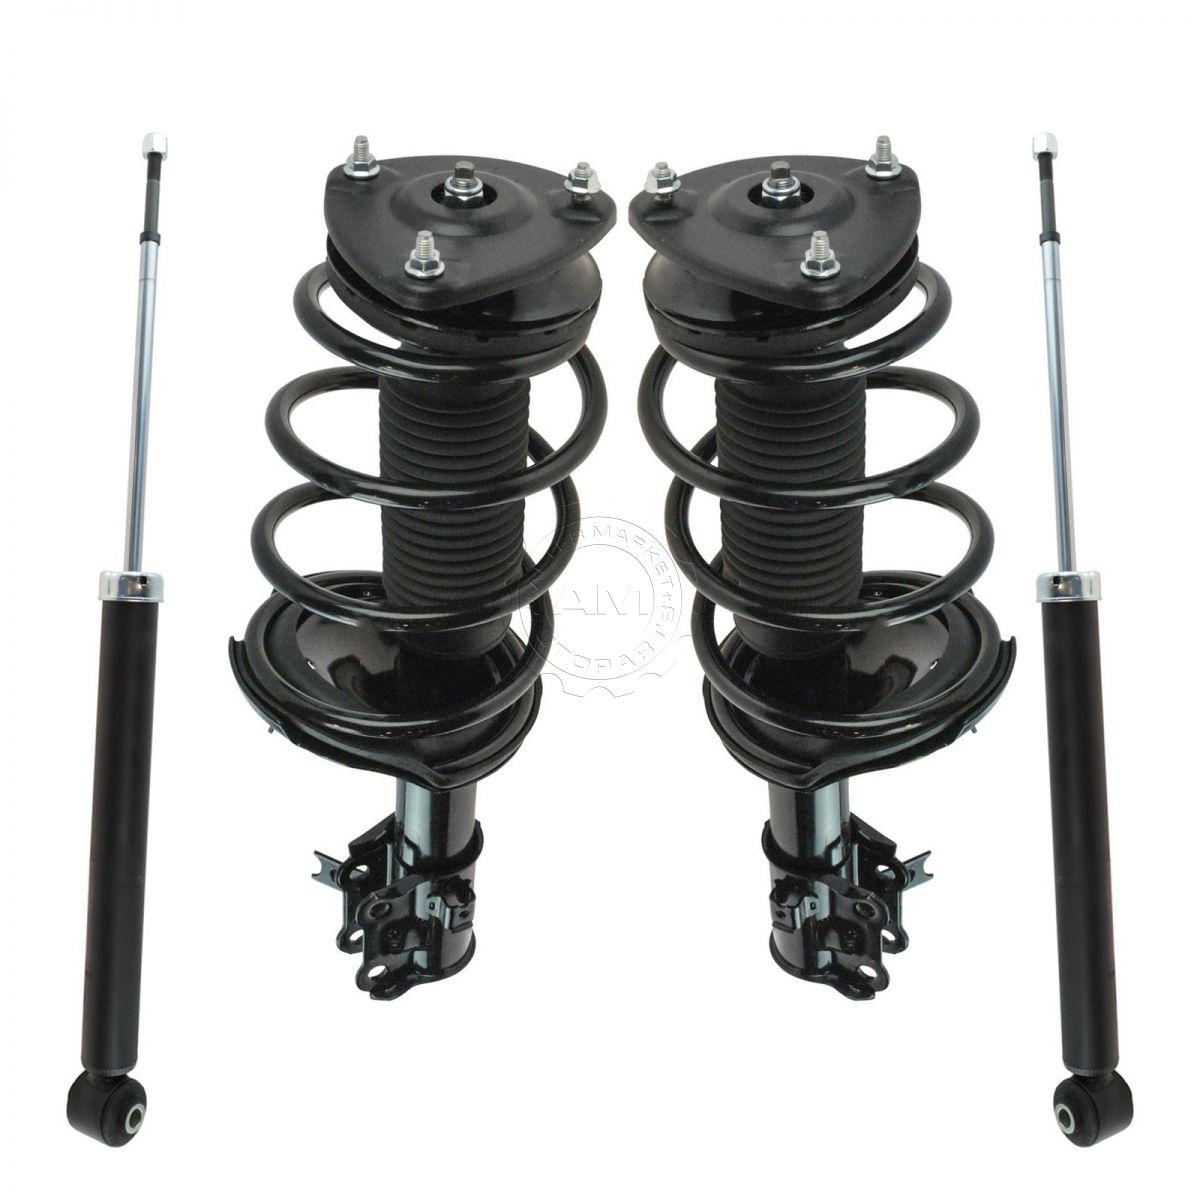 Full Set Strut Shock Absorbers For Hyundai Accent 06 07 08 09 10 11